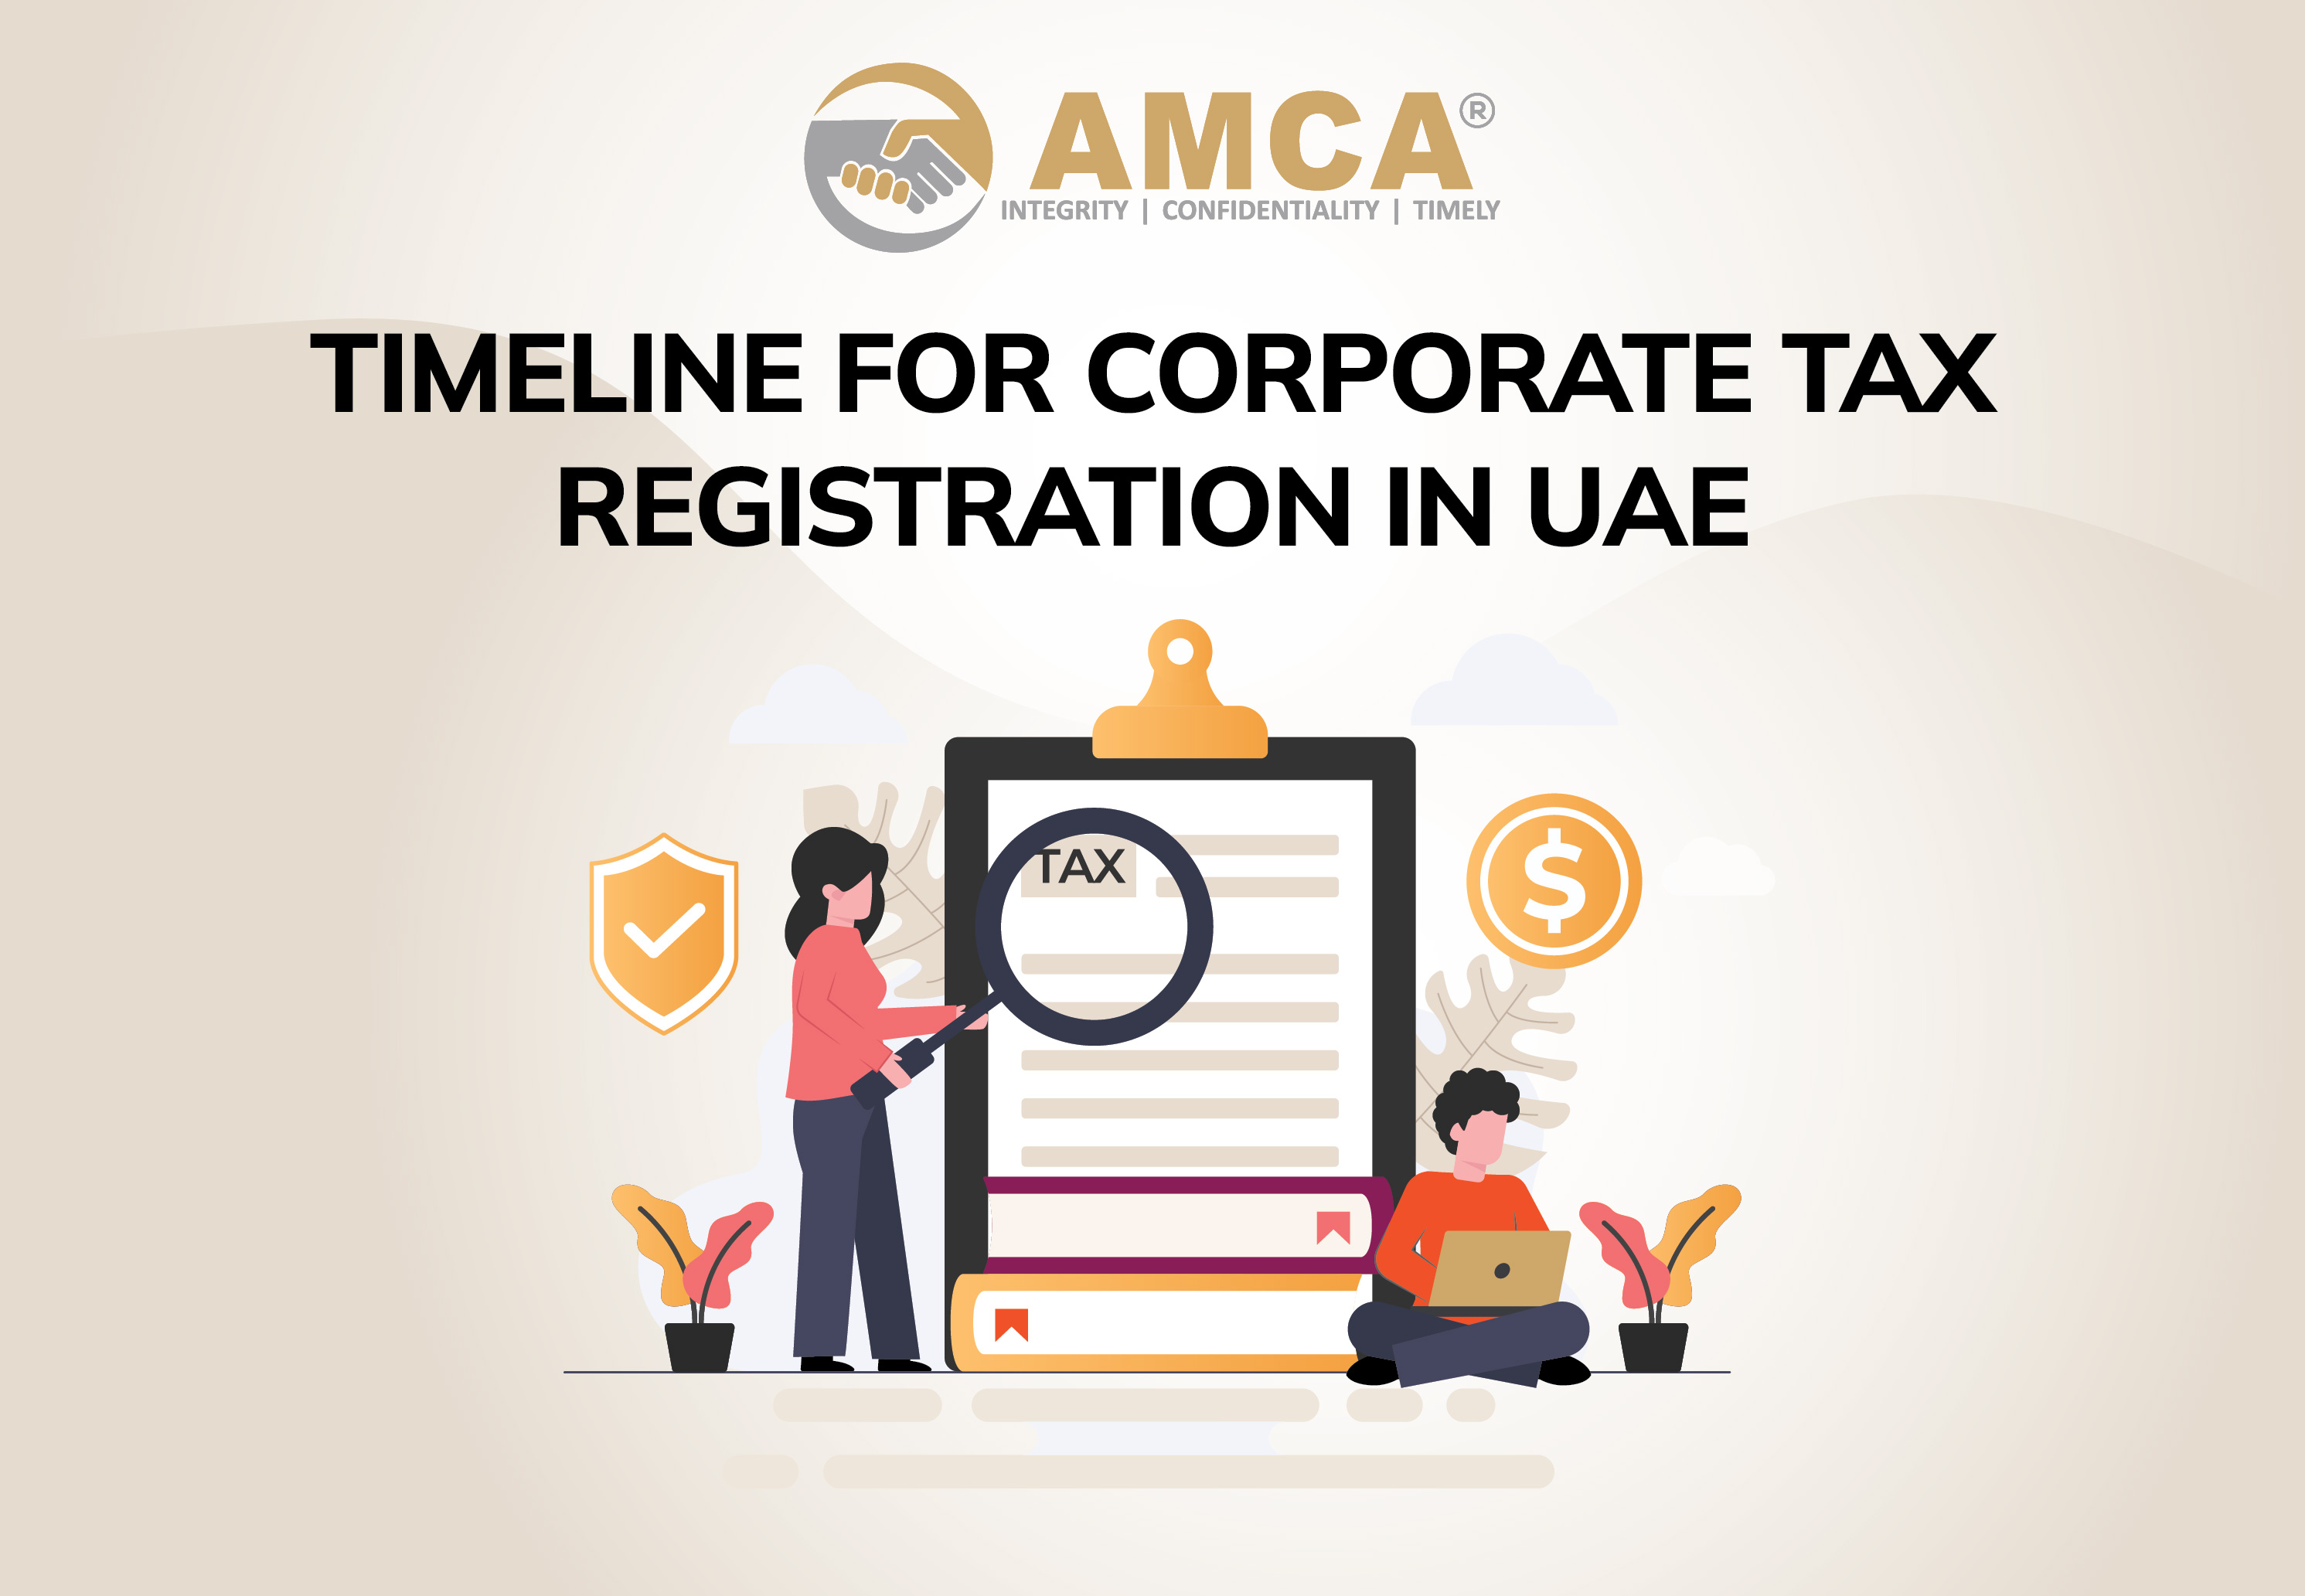 Timeline for Corporate Tax Registration in UAE